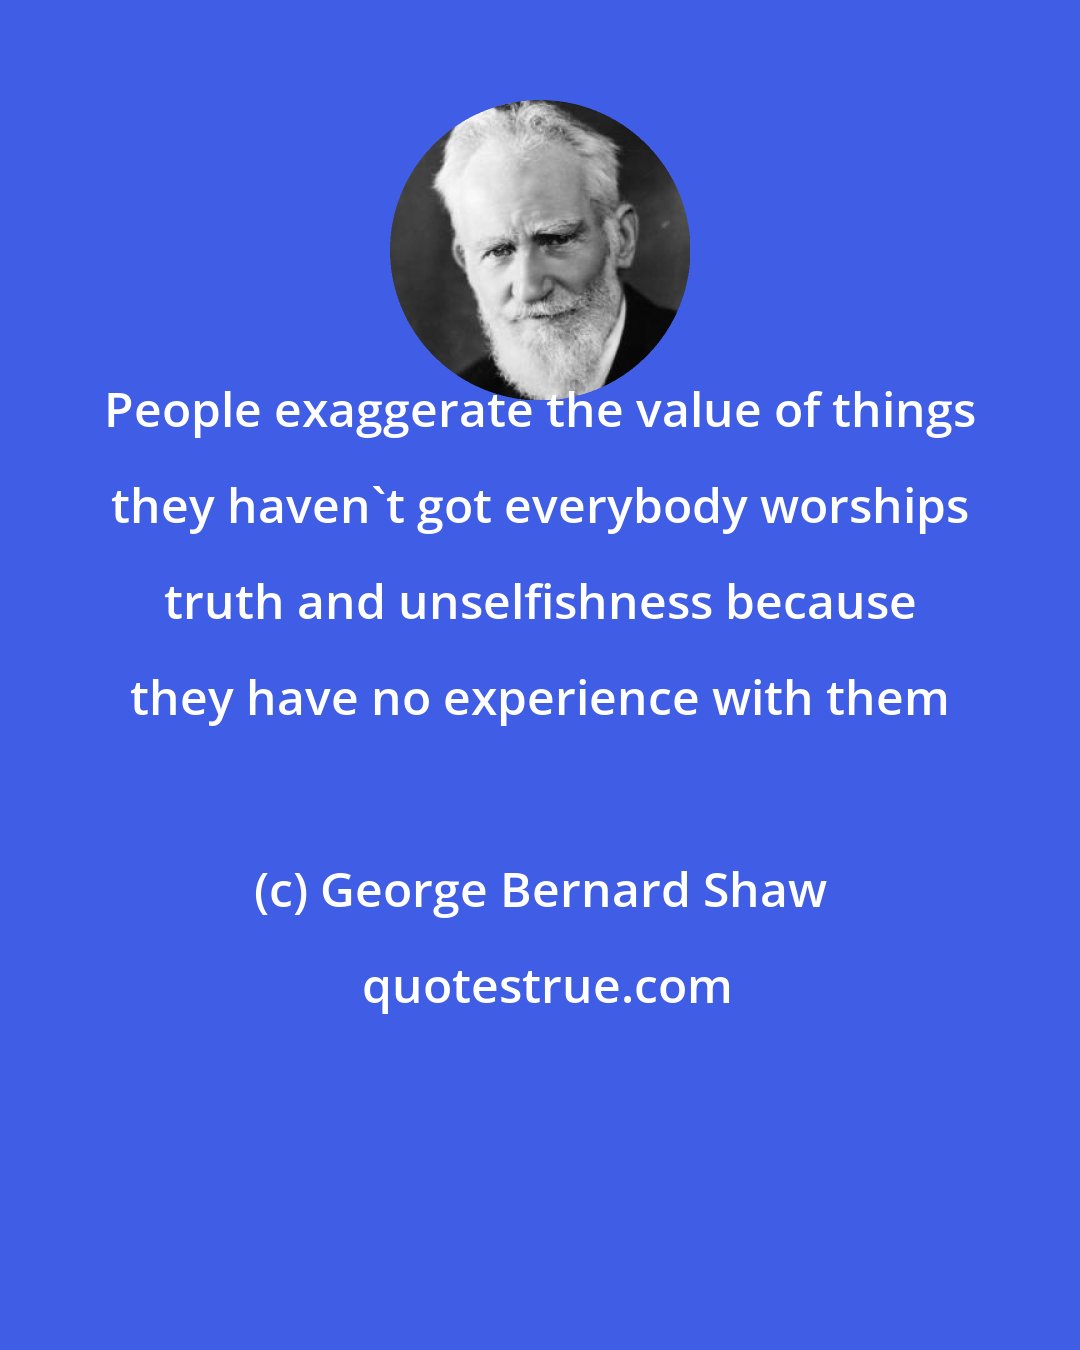 George Bernard Shaw: People exaggerate the value of things they haven't got everybody worships truth and unselfishness because they have no experience with them